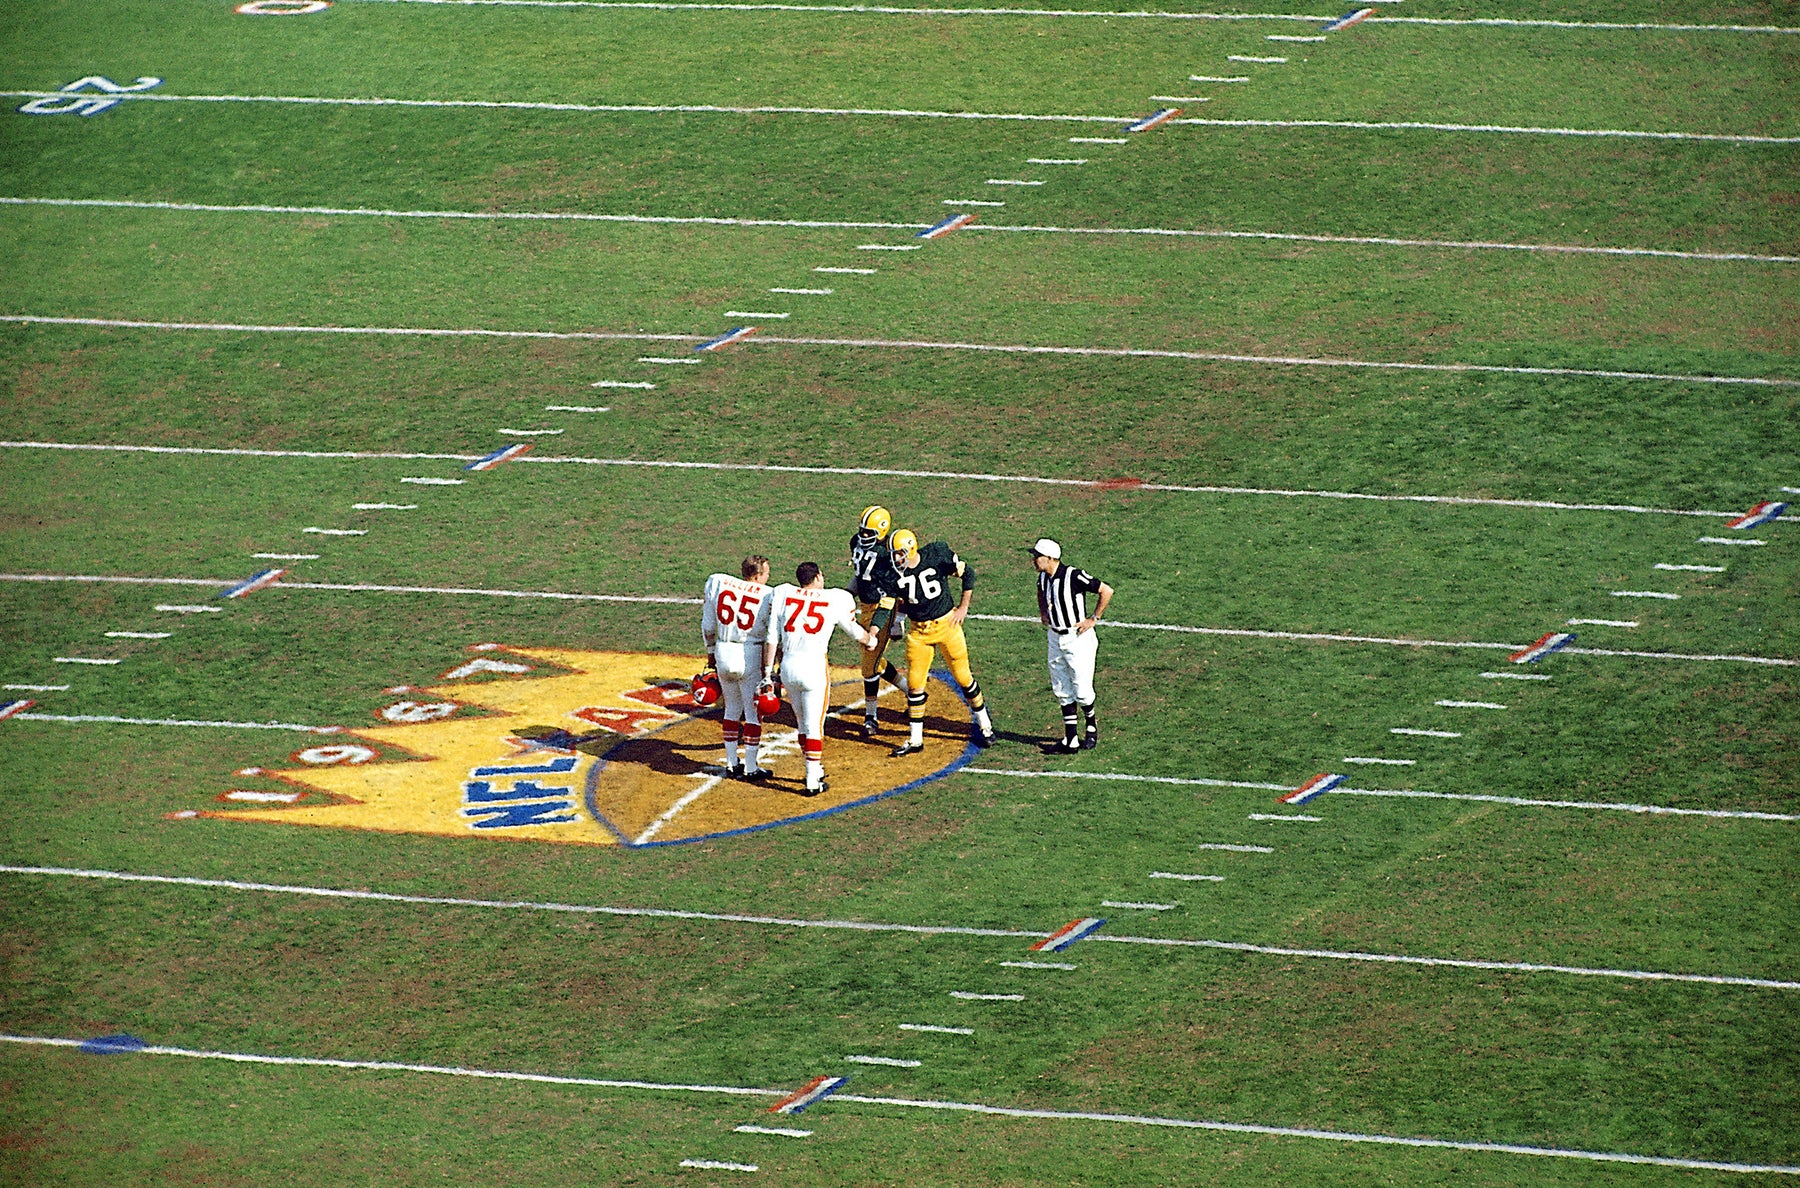 Coin Toss before Super Bowl I between the Green Bay Packers and Kansas City Chiefs